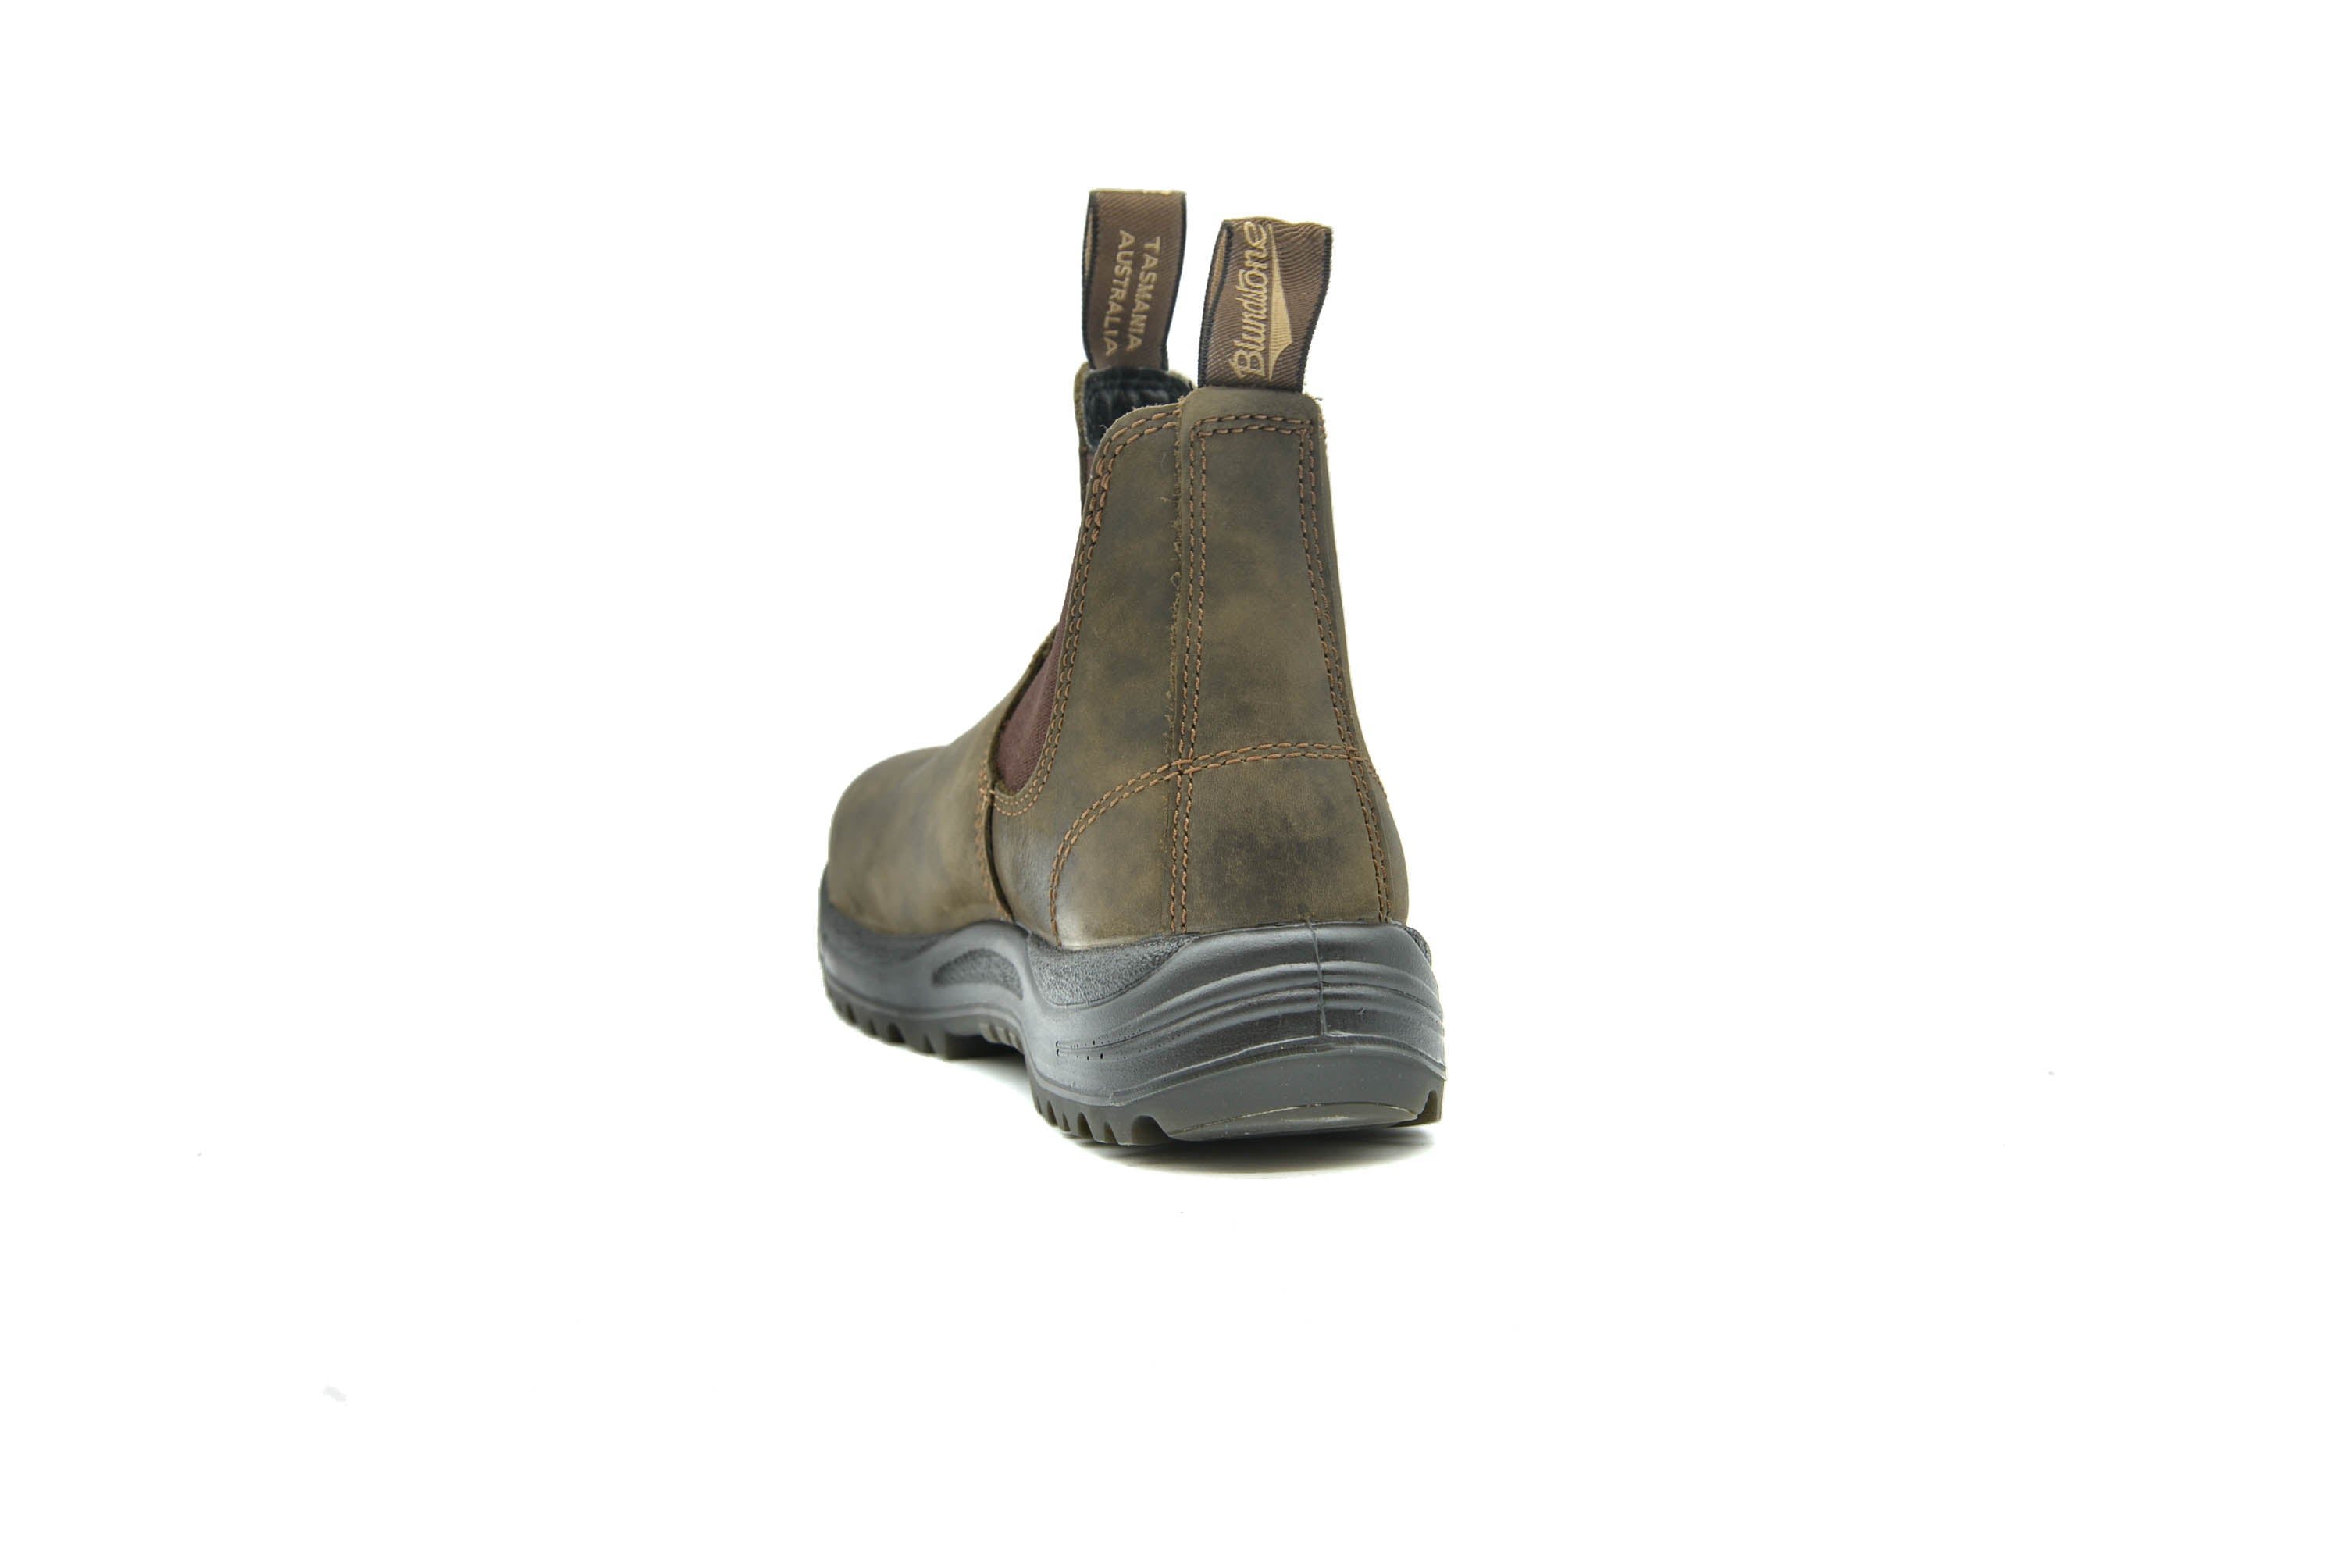 Blundstone Safety 180 Work &amp; Safety in New Waxy Rustic Brown